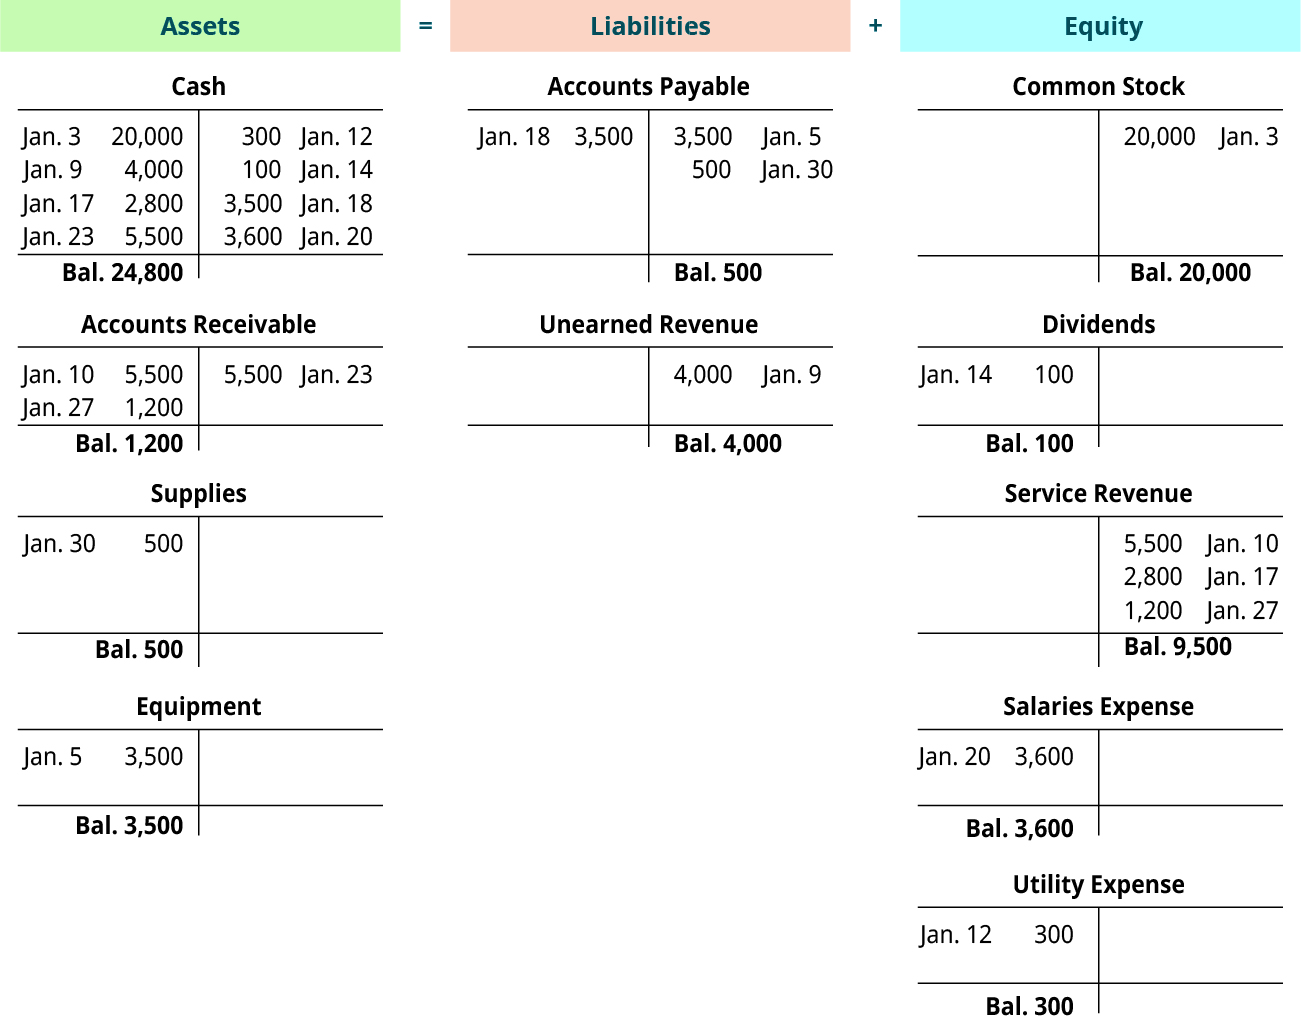 Three columns headed Assets equal Liabilities plus Equity. The Asset column has four T-accounts. Cash, with a debit entry dated January 3 for 20,000, a debit entry dated January 9 for 4,000, a debit entry dated January 17 for 2,800, a debit entry dated January 23 for 5,500, a credit entry dated January 12 for 300, a credit entry dated January 14 for 100, a credit entry dated January 18 for 3,500, a credit entry dated January 20 for 3,600, and a balance of 24,800. Accounts Receivable, with a debit entry dated January 10 for 5,500, a debit entry dated January 27 for 1,200, a credit entry dated January 23 for 5,500, and a balance of 1,200. Supplies, with a debit entry dated January 30 for 500, and a balance of 500. Equipment, with a debit entry dated January 5 for 3,500, and a balance of 3,500. The Liability column has two T-accounts. Accounts Payable, with a debit entry dated January 18 for 3,500, a credit entry dated January 9 for 3,500, a credit entry dated January 30 for 500, and a balance of 500. Unearned Revenue, with a credit entry dated January 9 for 4,000, and a balance of 4,000. The Equity column has five T-accounts. Common Stock, with a credit entry dated January 3 for 20,000, and a balance of 20,000. Dividends, with a debit entry dated January 14 for 100, and a balance of 100. Service Revenue, with a credit entry dated January 10 for 5,500, a credit entry dated January 17 for 2,800, a credit entry dated January 27 for 1,200, and a balance of 9,500. Salaries Expense, with a debit entry dated January 20 for 3,600, and a balance of 3,600. Utility Expense, with a debit entry dated January 12 for 300, and a balance of 300.